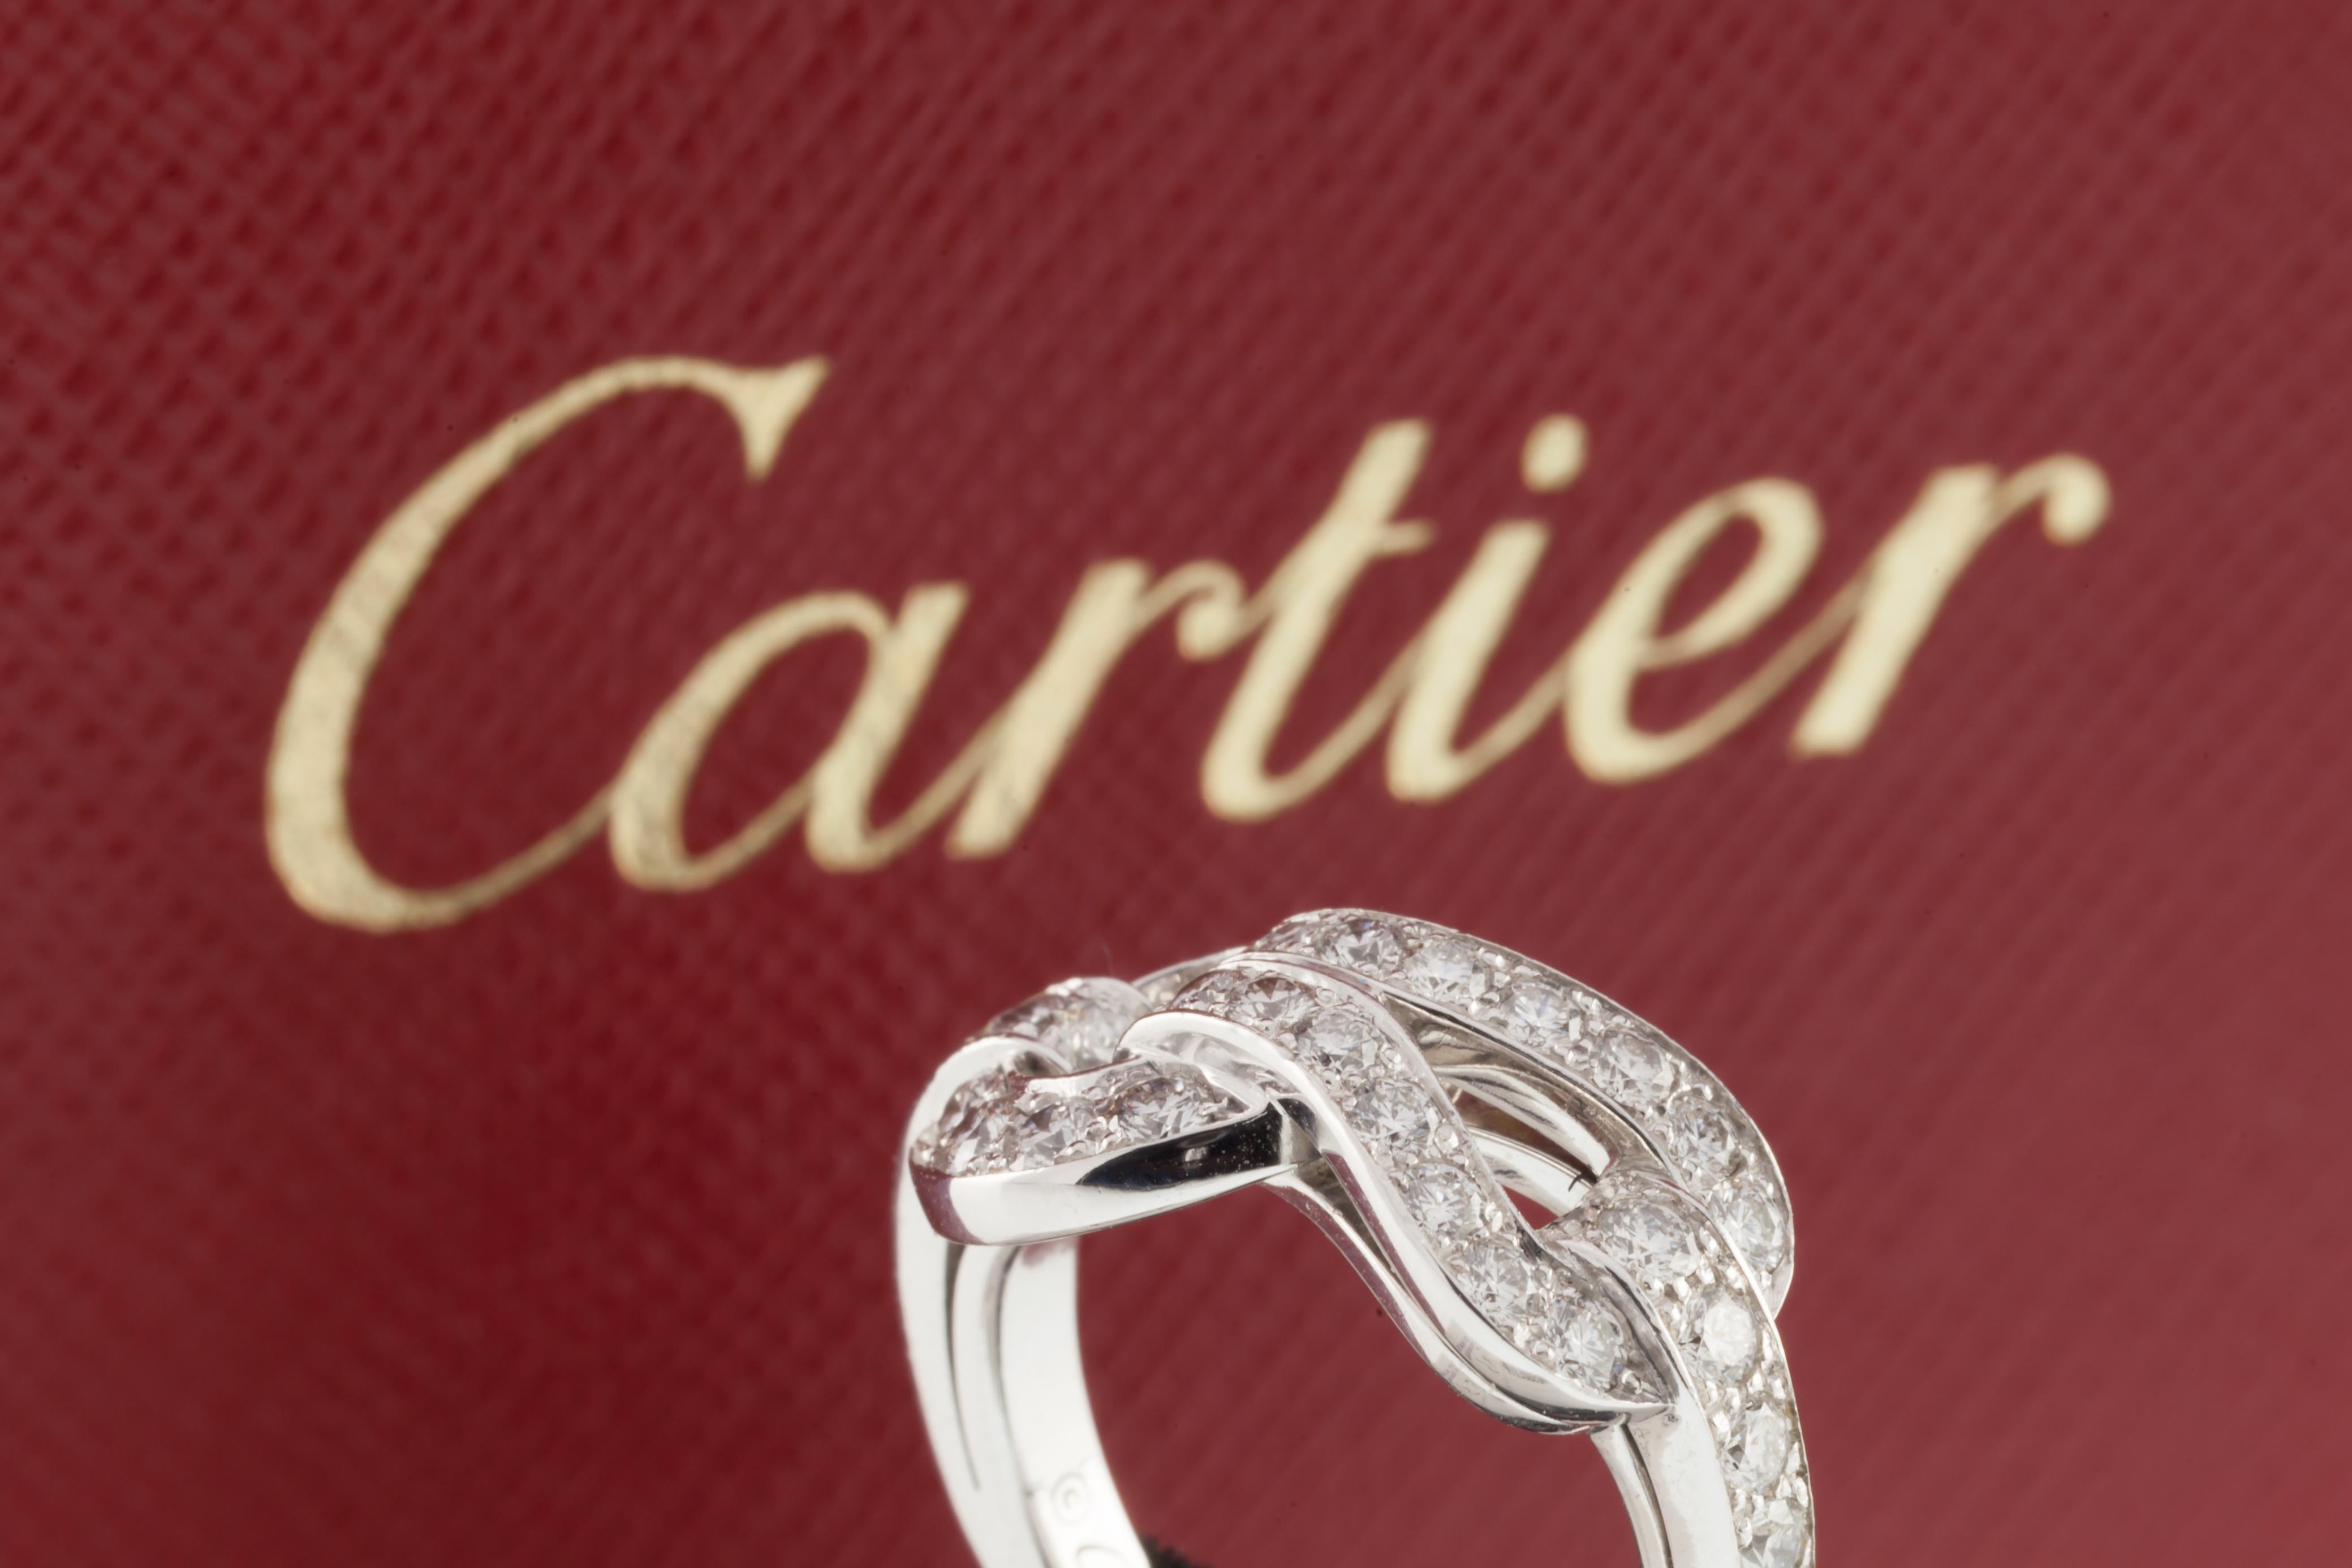 Cartier 18k White Gold Agrafe Band Ring 0.94 Ct w/ Original Box For Sale 3